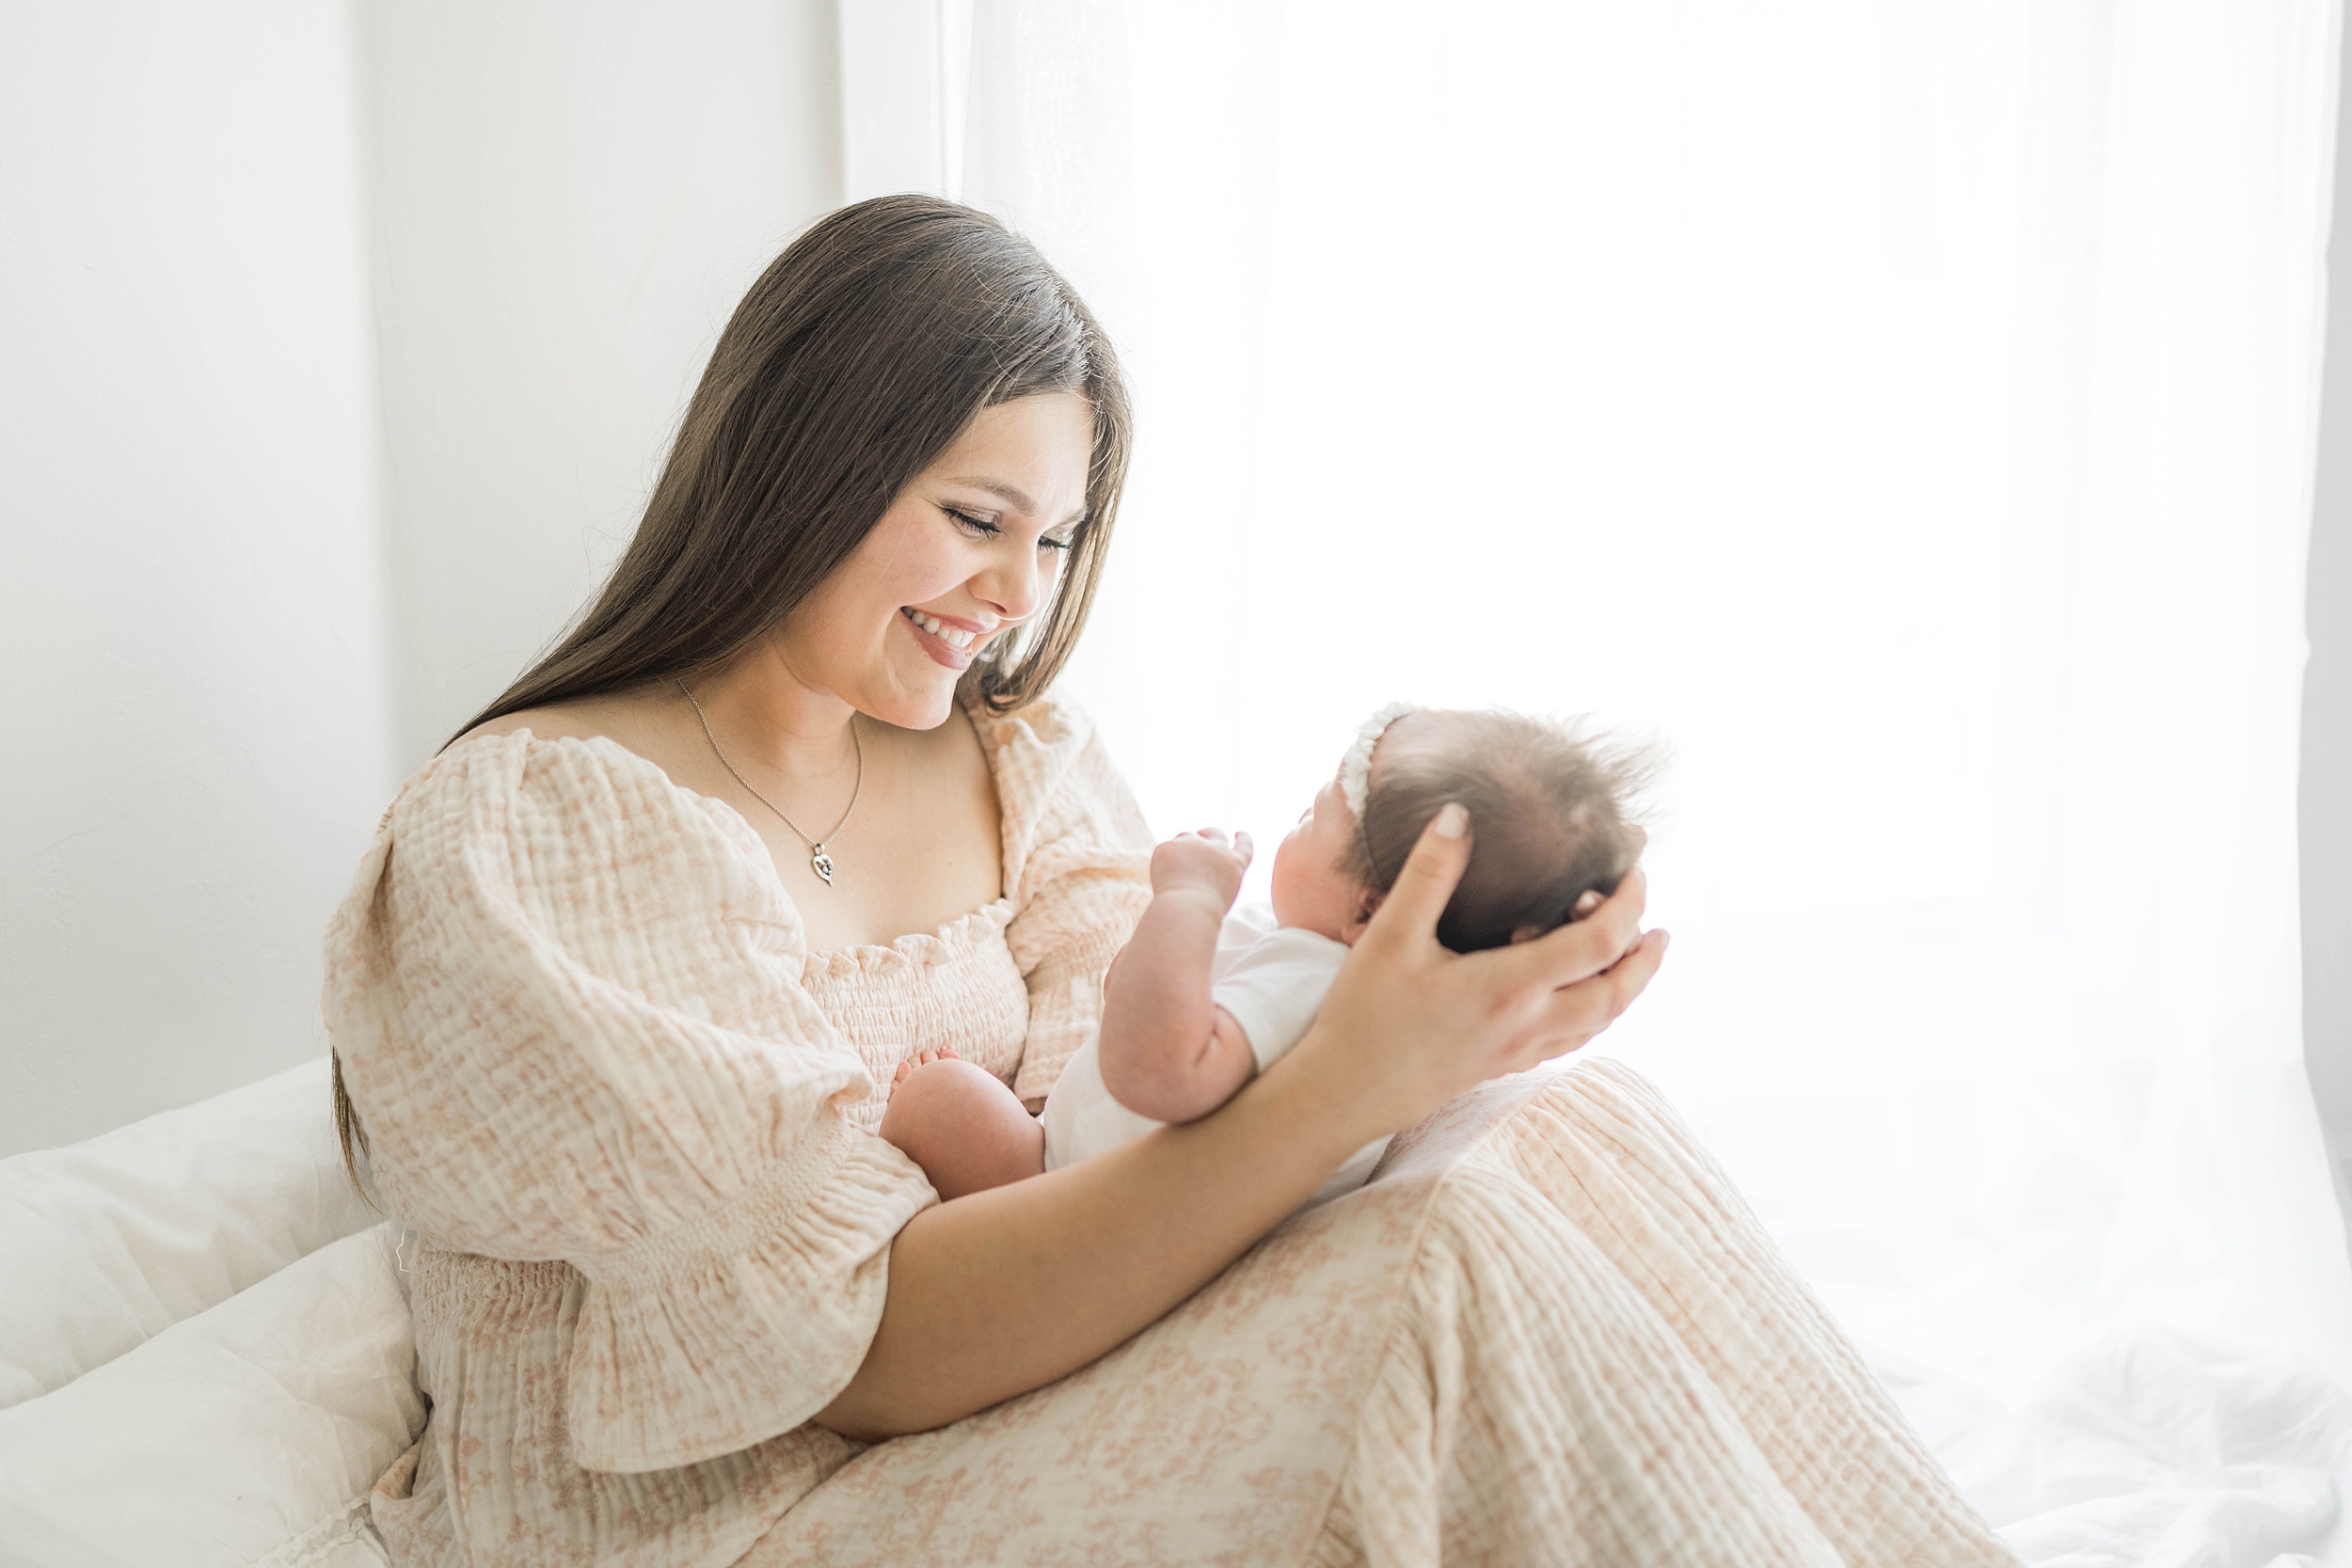 A mother in a floral dress sits on a bed smiling down at her newborn baby daughter in her lap